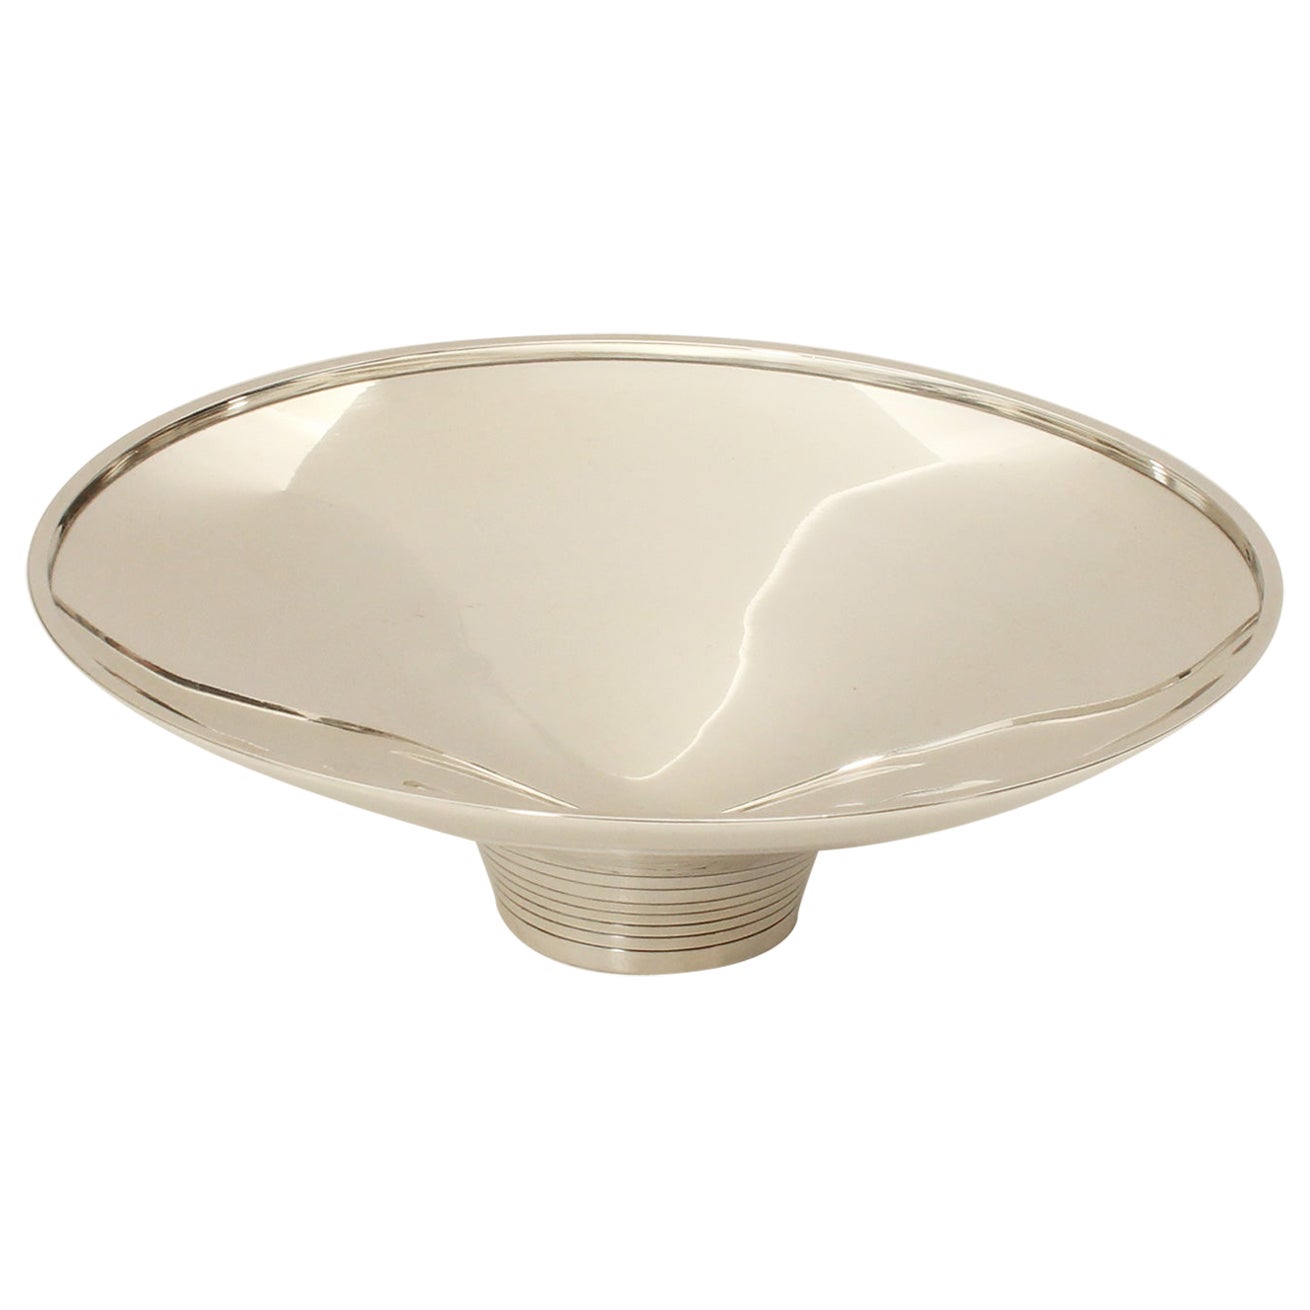 Georg Jensen Sterling Silver Bowl from 1950s For Sale